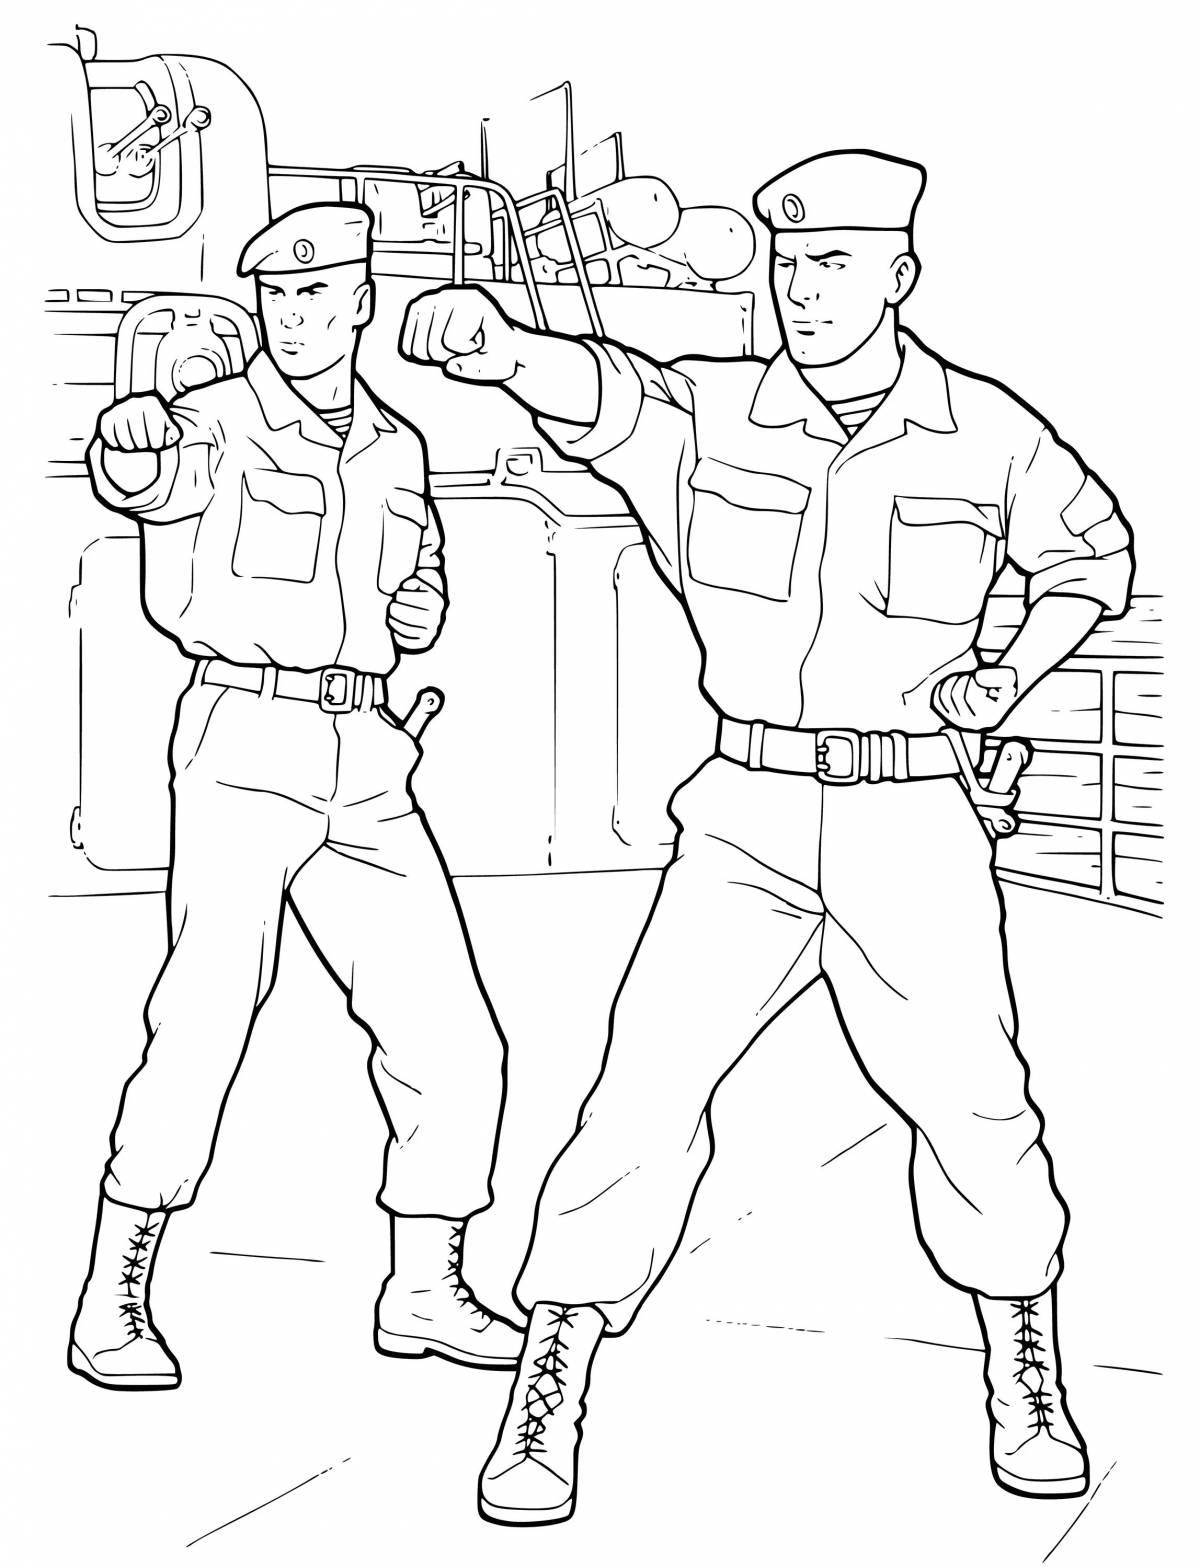 Charming russian soldier coloring pages for kids